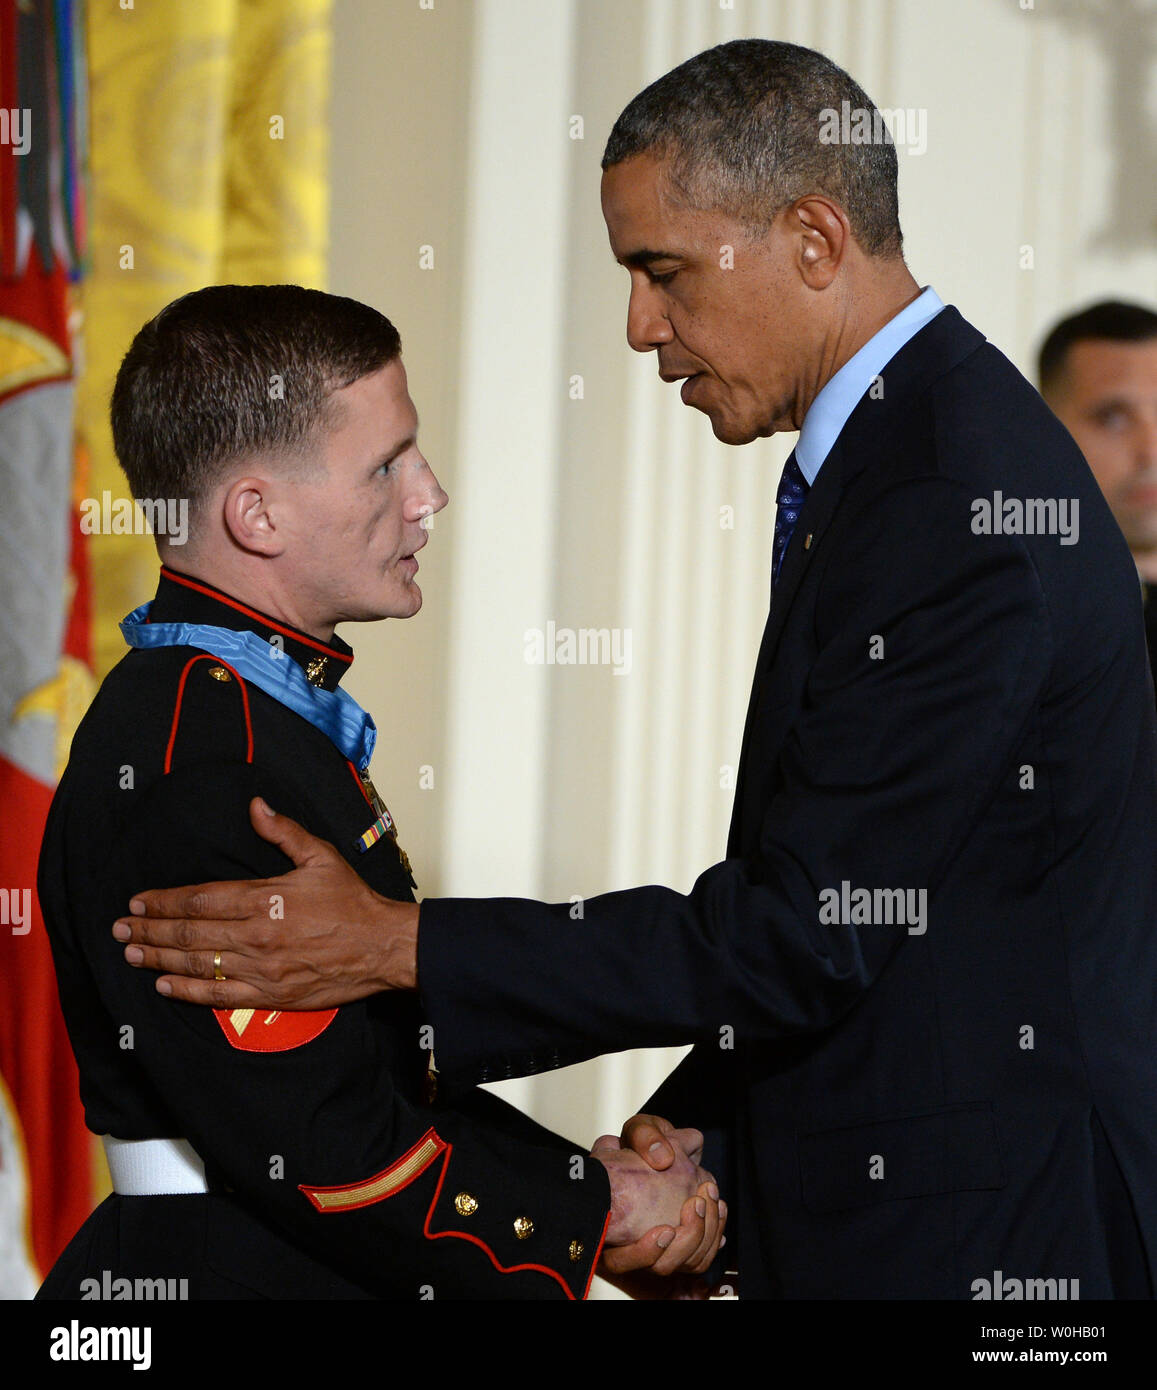 President Barack Obama awards the Medal of Honor to retired Marine William 'Kyle' Carpenter during a ceremony in the East Room of the White House in Washington, DC on June 19, 2014.  Carpenter, 24, of Gilbert, South Carolina was awarded the nation's highest award for gallantry for covering a grenade with his body to save a Marine's life in Afghanistan in 2010.    UPI/Pat Benic Stock Photo